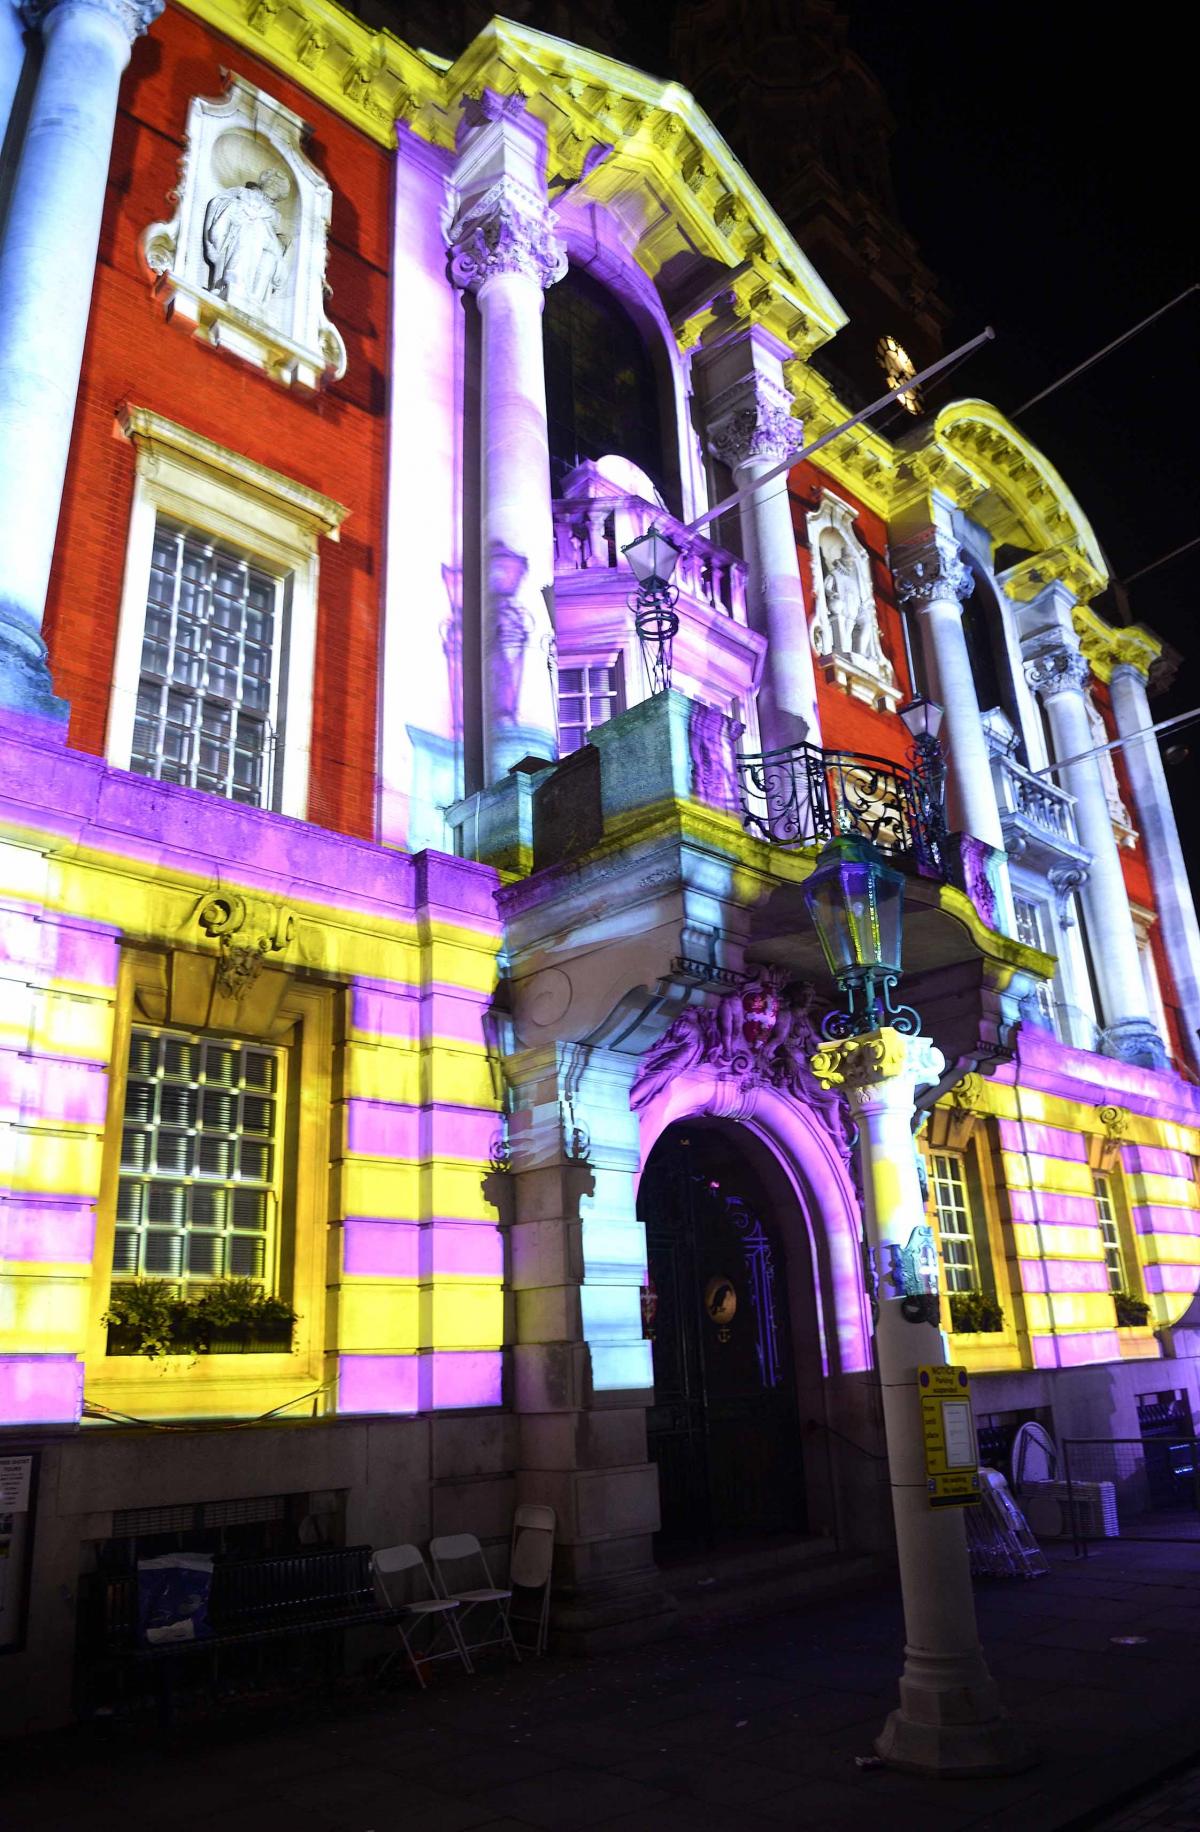 The Halloween light show at Colchester Town Hall